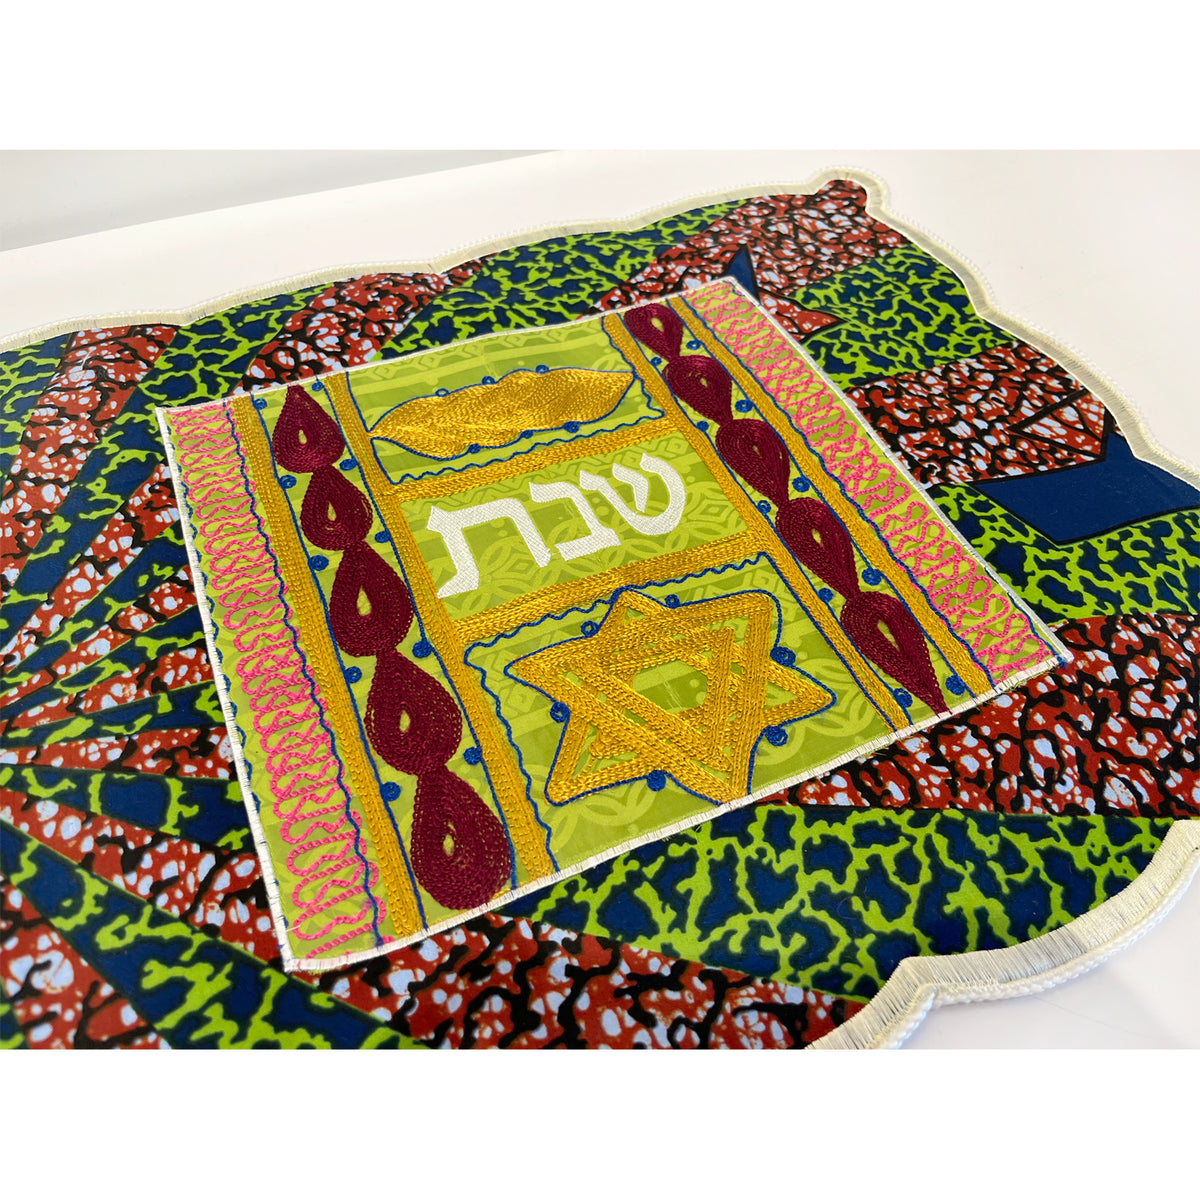 House of Israel - Challah Cover Magen David, 17" x 21"